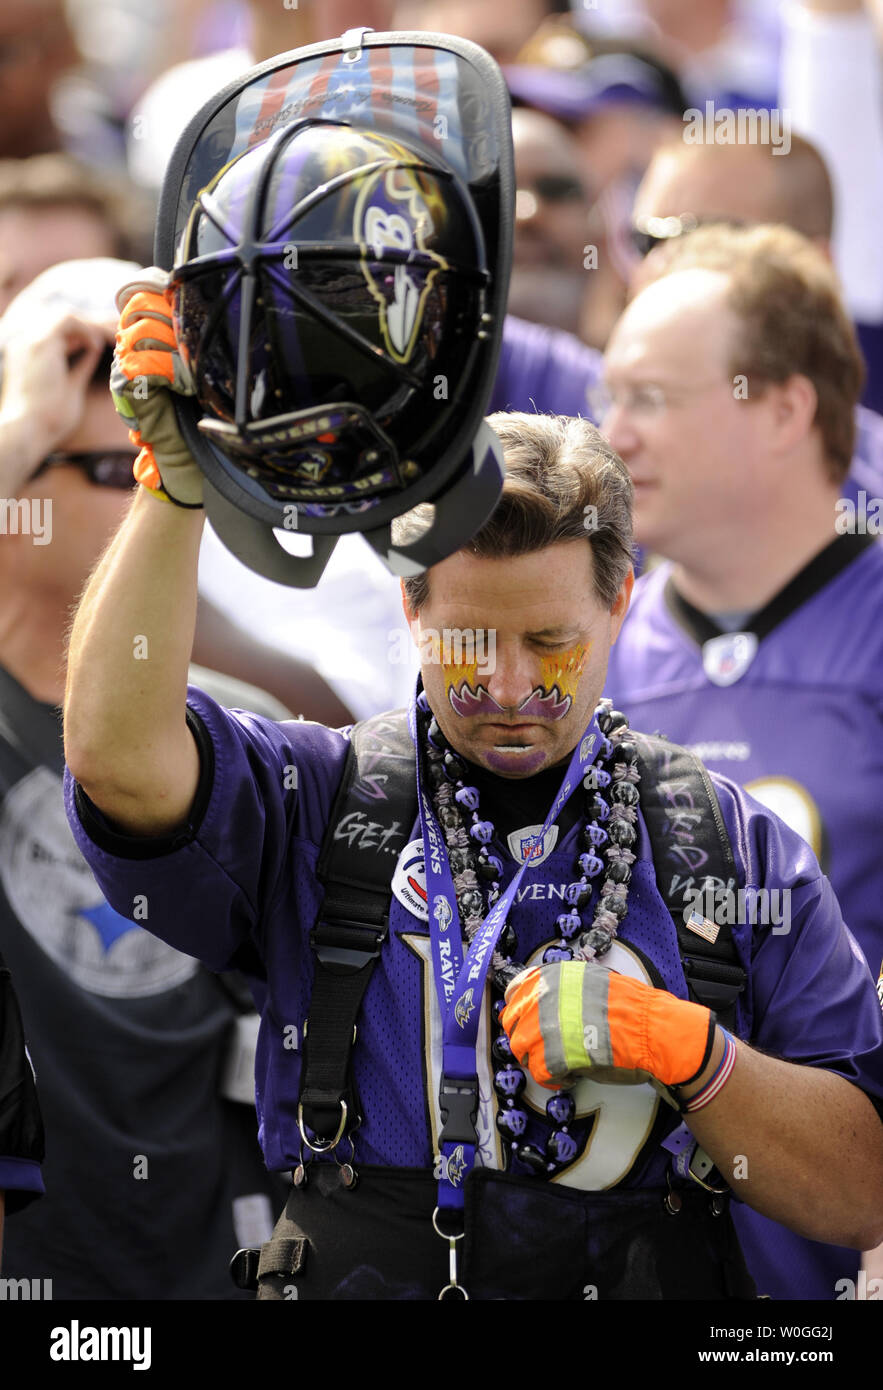 A Ravens fan in firefighter gear prays before the Pittsburgh Steelers play  the Baltimore Ravens at M&T Bank Stadium in Baltimore, Maryland on  September 11, 2011. UPI/Roger L. Wollenberg Stock Photo - Alamy